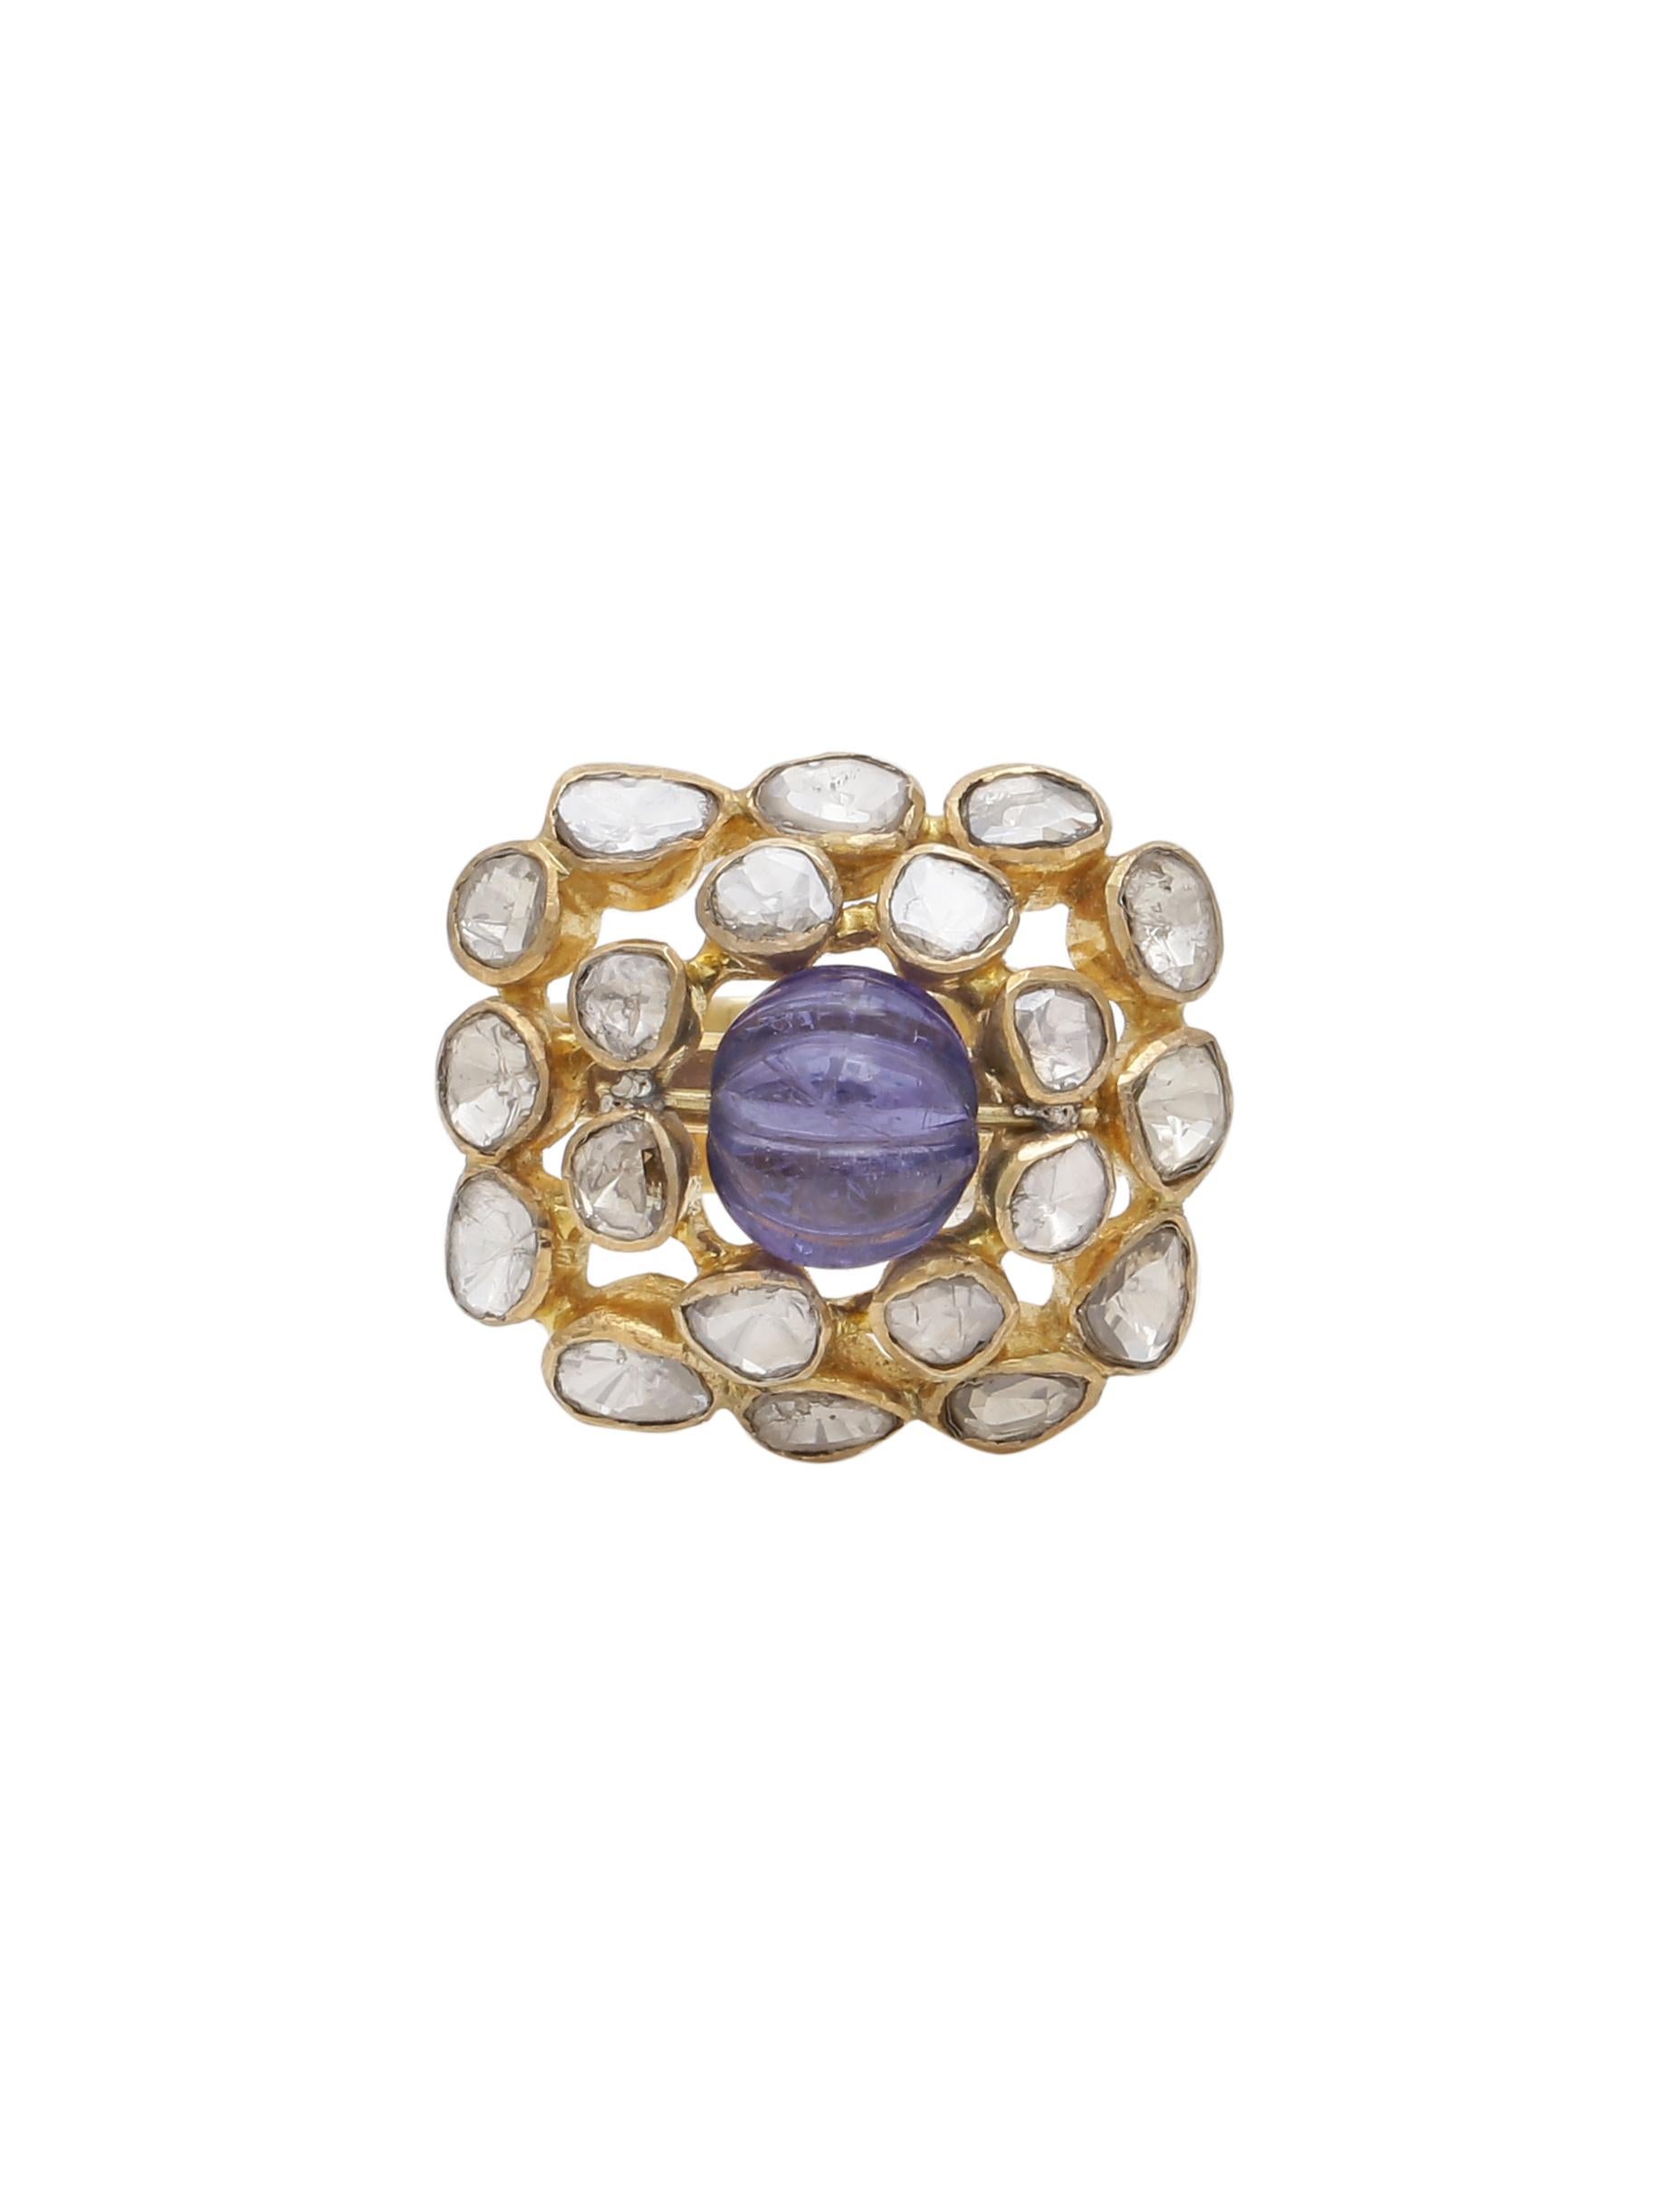 Art Deco Diamond and Hand Carved Tanzanite Melon Cocktail Ring Handcrafted in 18K Gold For Sale